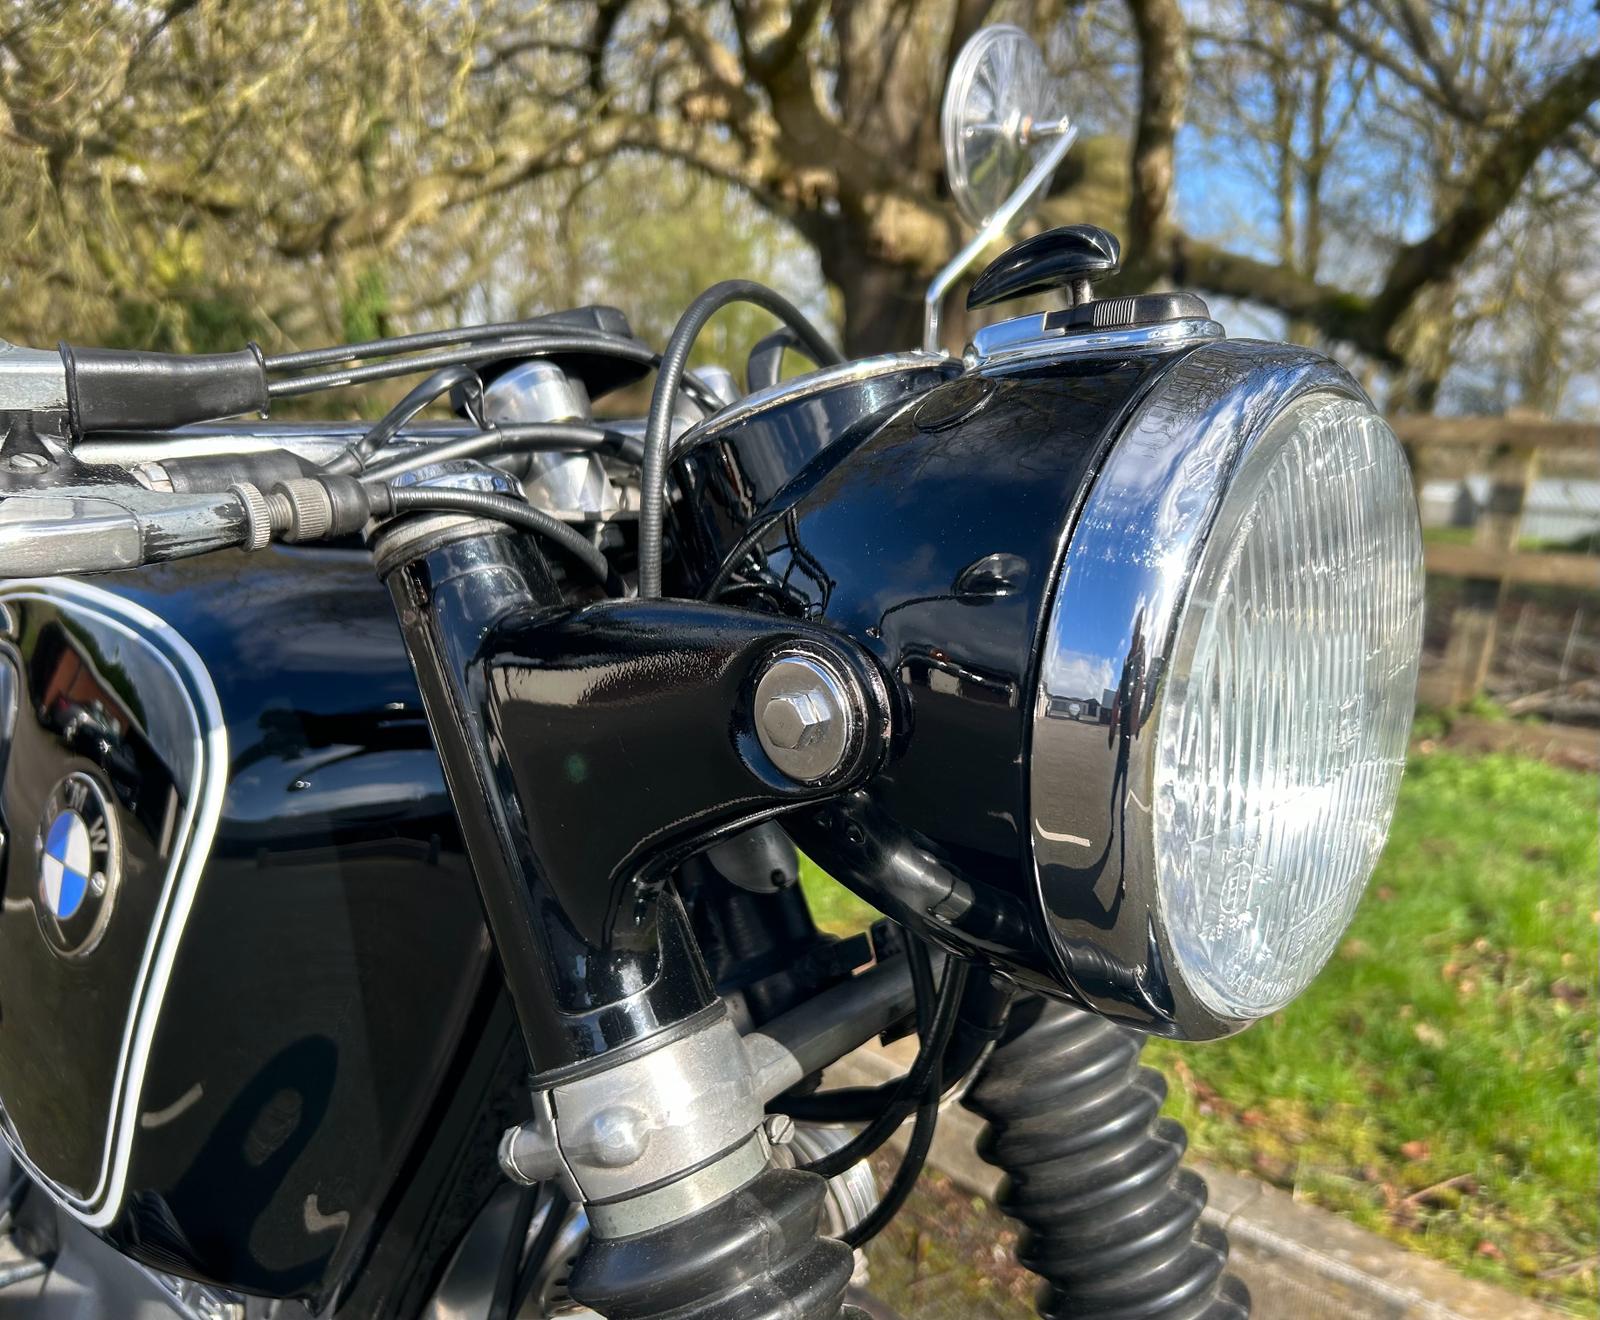 A BMW R75/5 MOTORCYCLE .1971. 72452 MILES. EXCELLENT WELL RESTORED CONDITION, V5, MOT AND TAX - Image 14 of 17